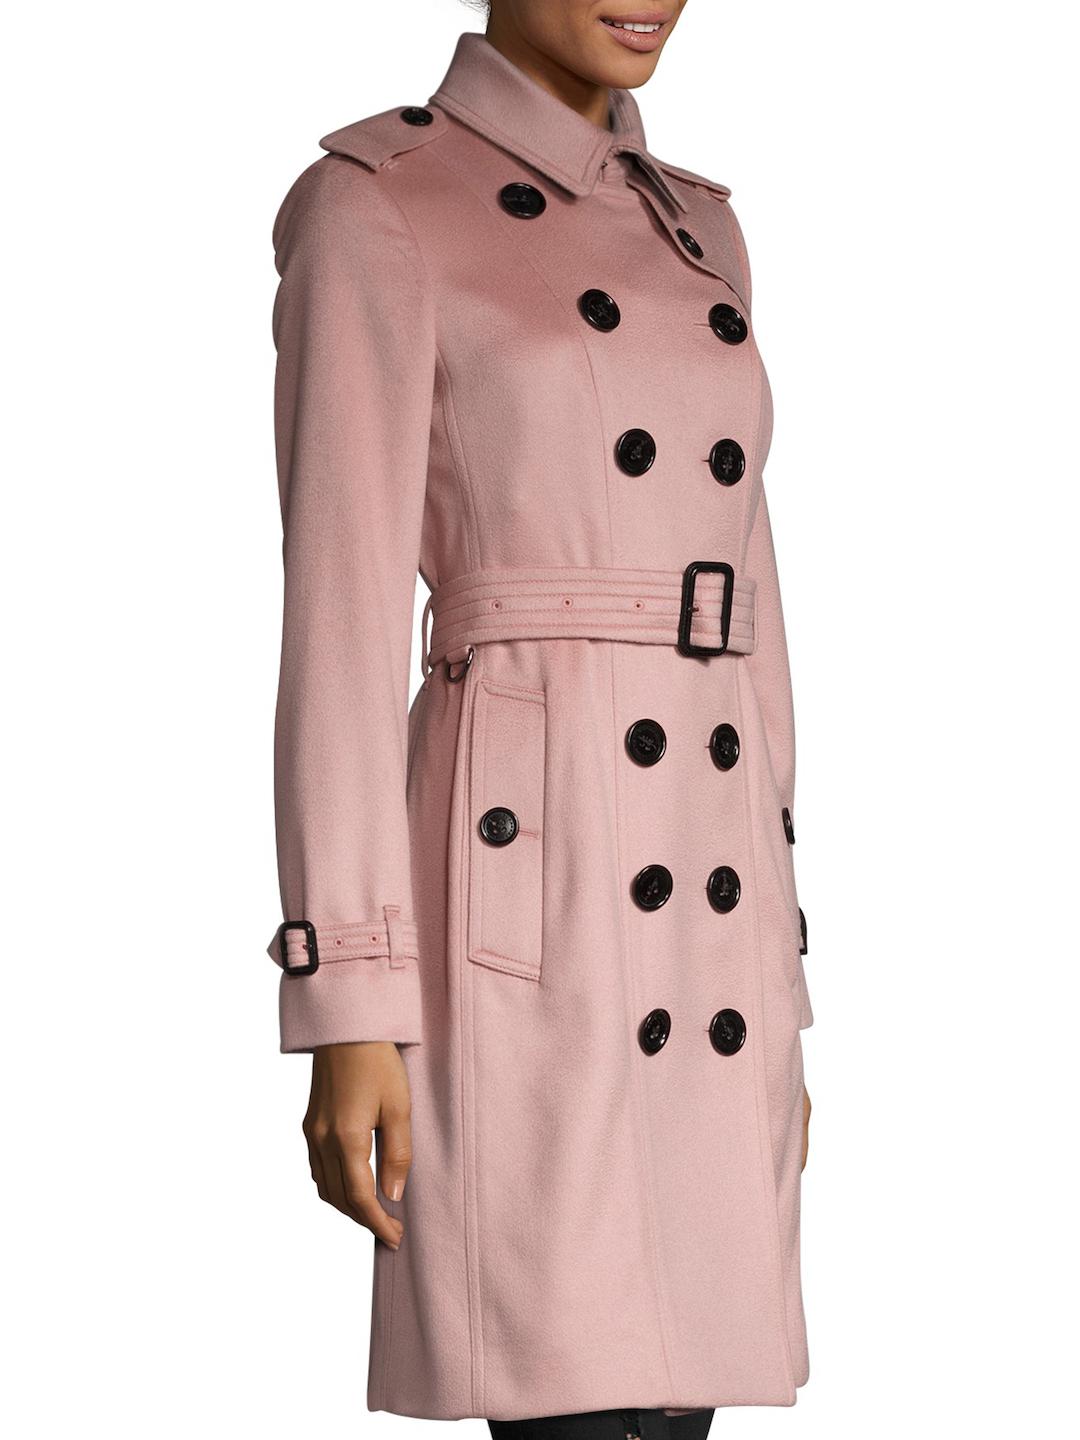 Burberry Sandringham Fit Cashmere Trench Coat in Pink | Lyst